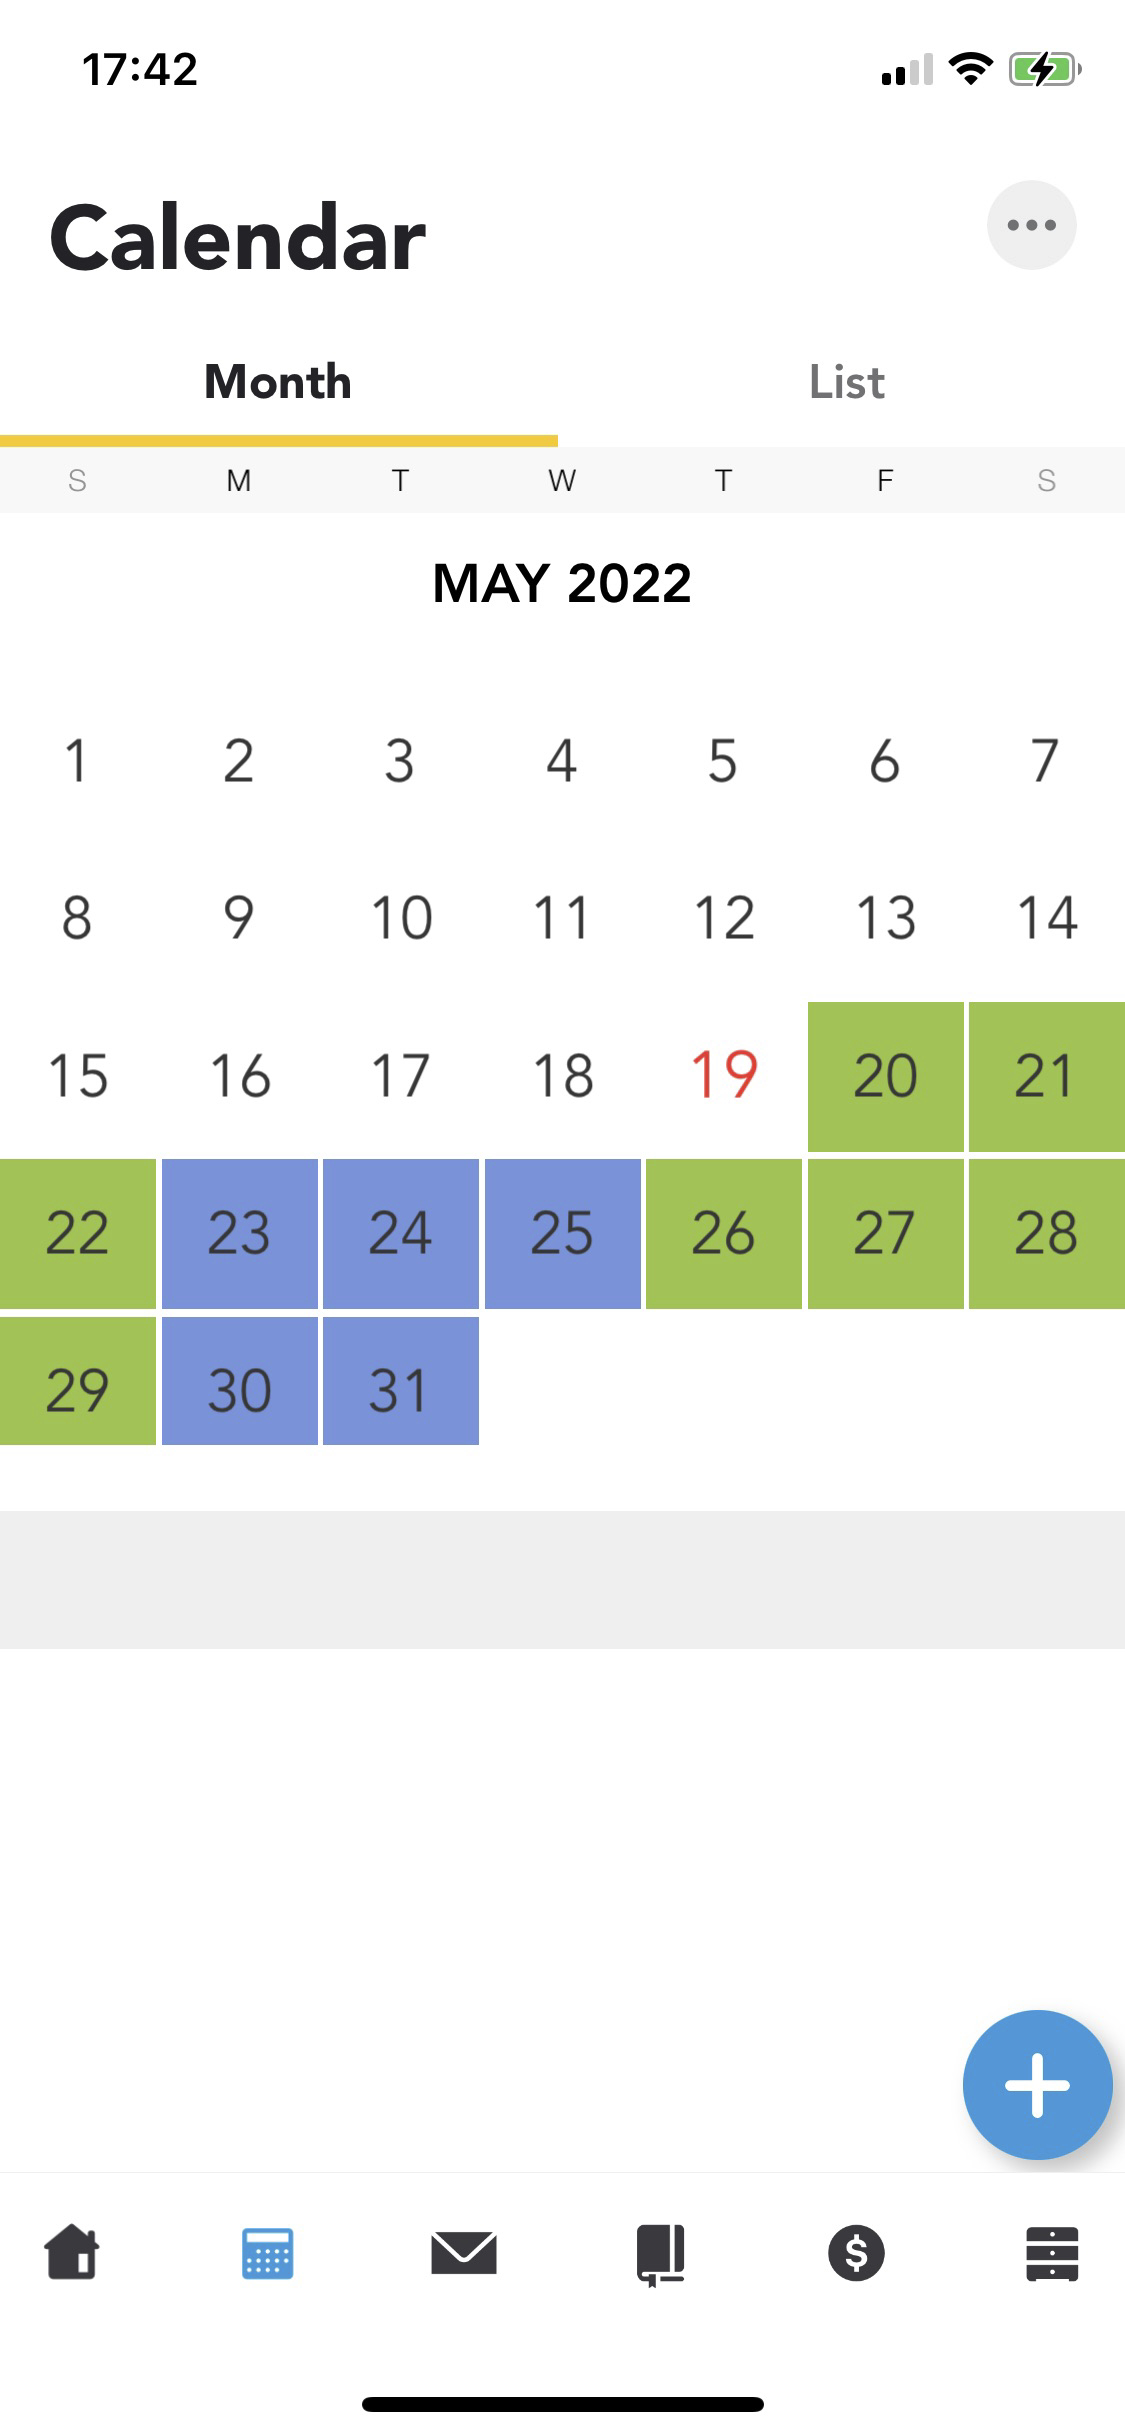 OurFamilyWizard calendar showing one parent's child care days in green and the other's in blue